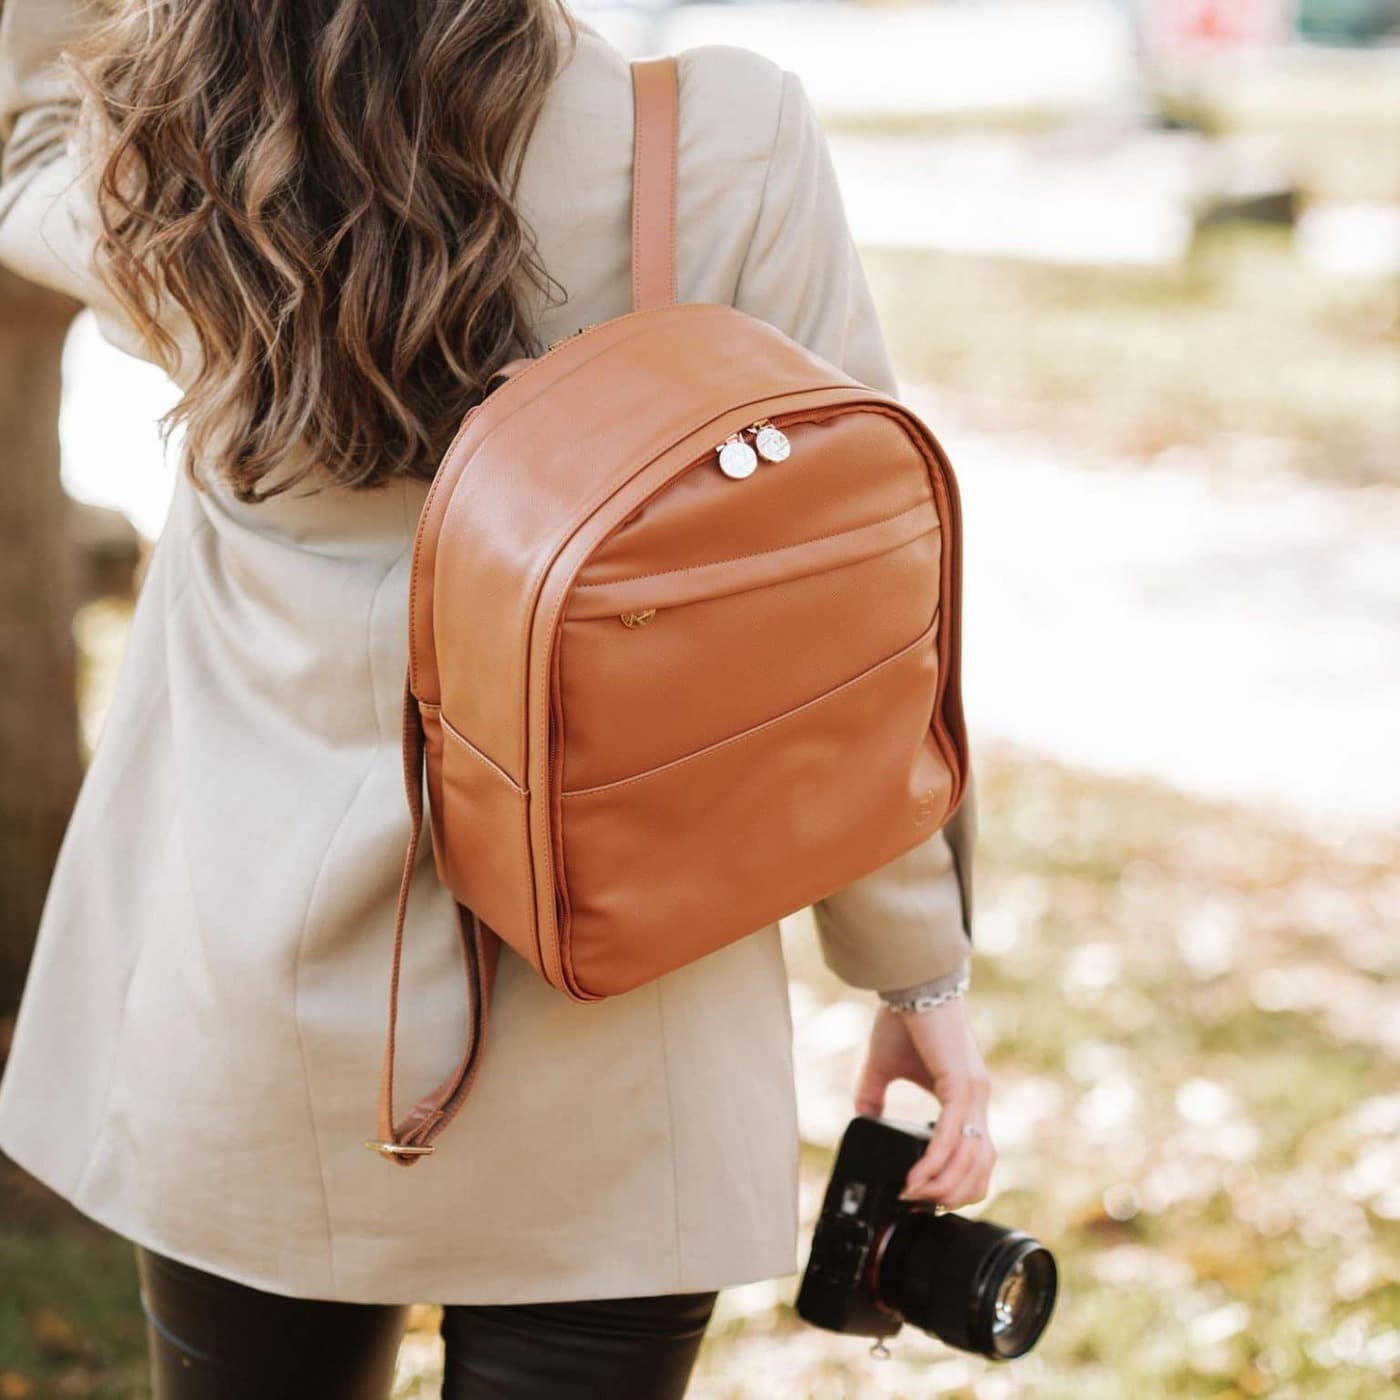 The 25 Best Stylish Camera Bags for Women - 2020